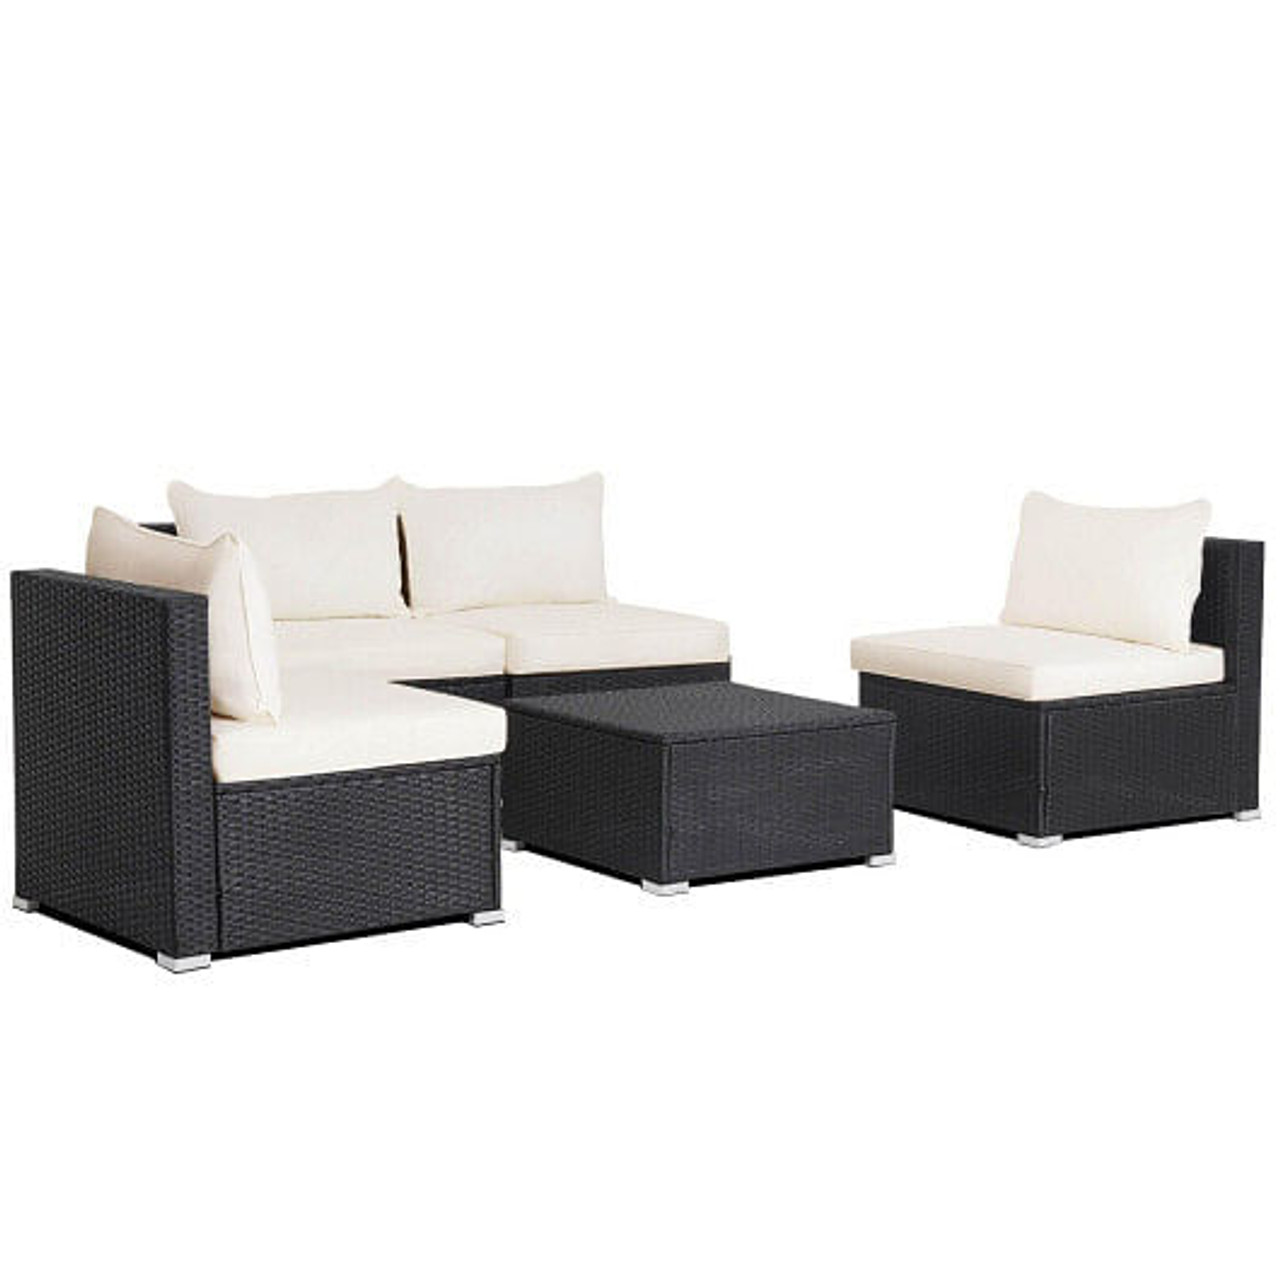 5 Pieces Outdoor Patio Furniture Set with Cushions and Coffee Table